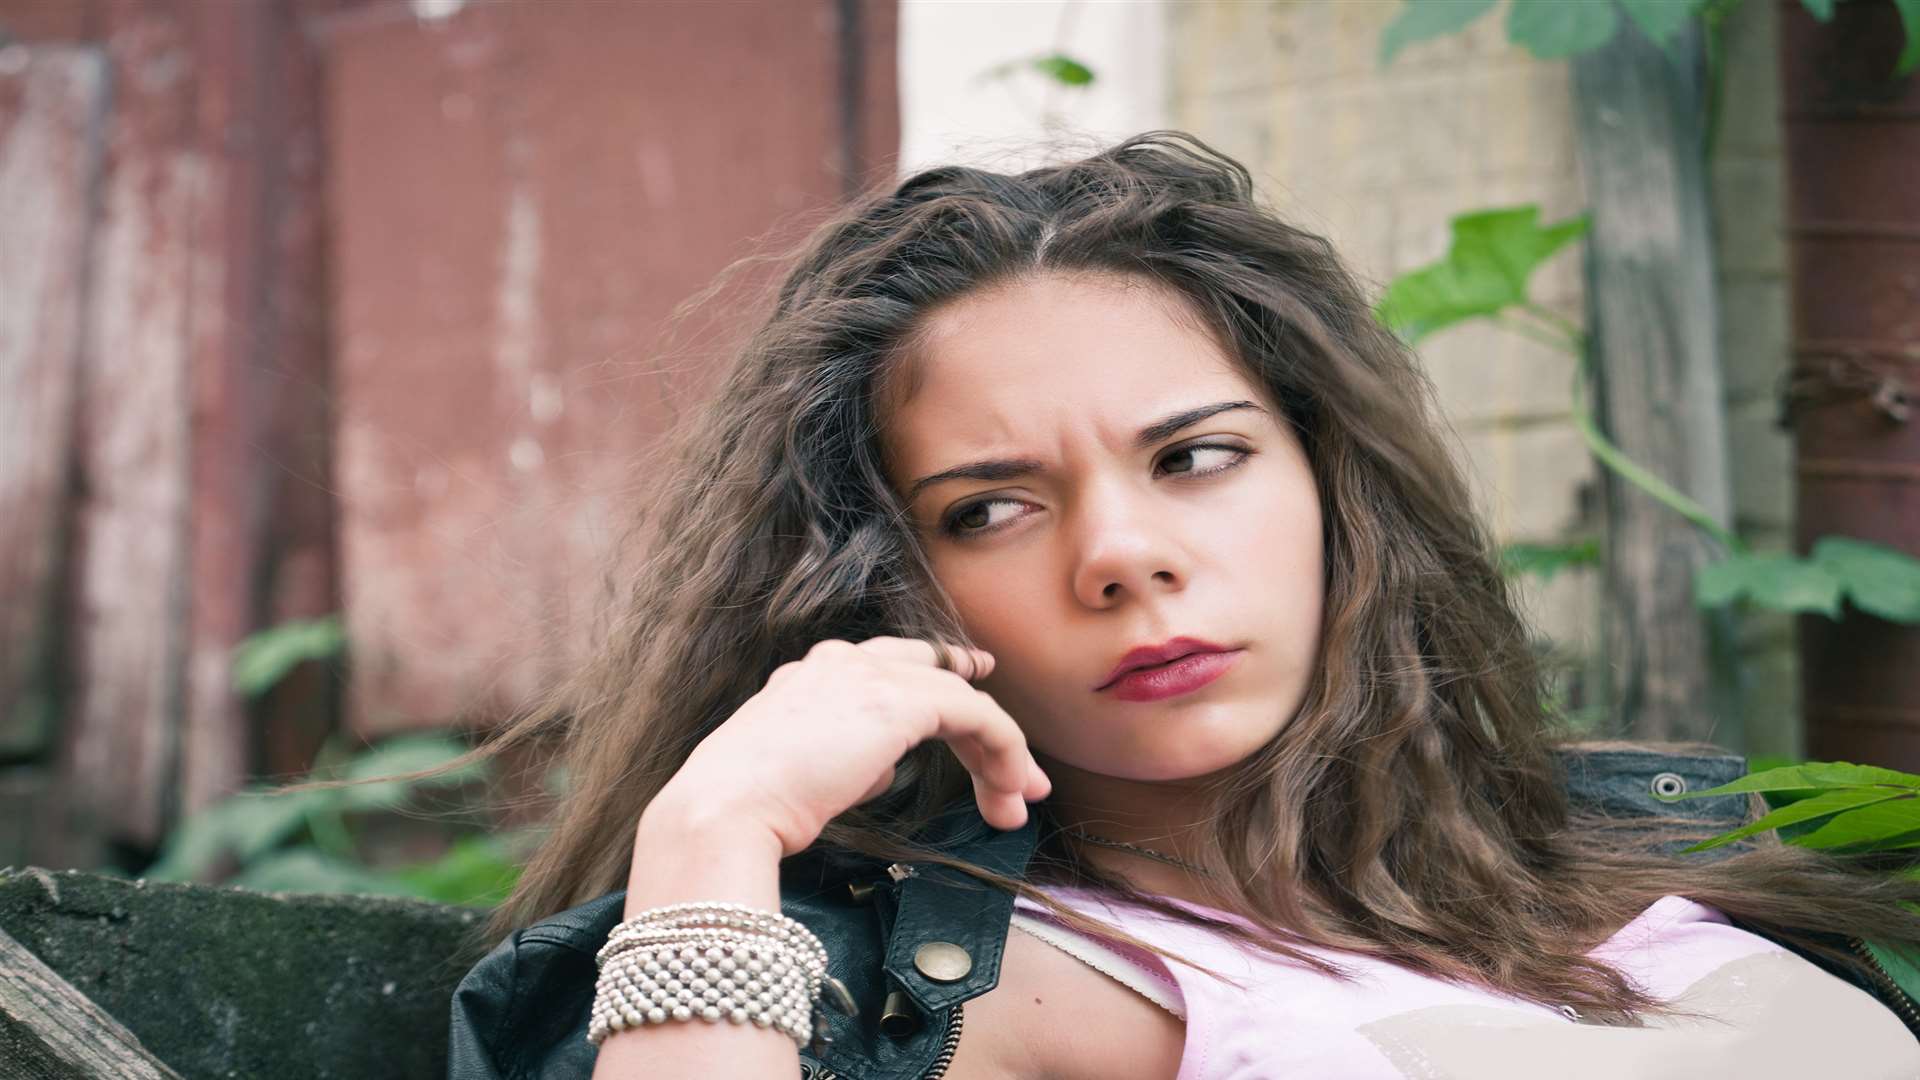 Teenagers are often thought of as moody. Picture PA/Thinkstock Photos